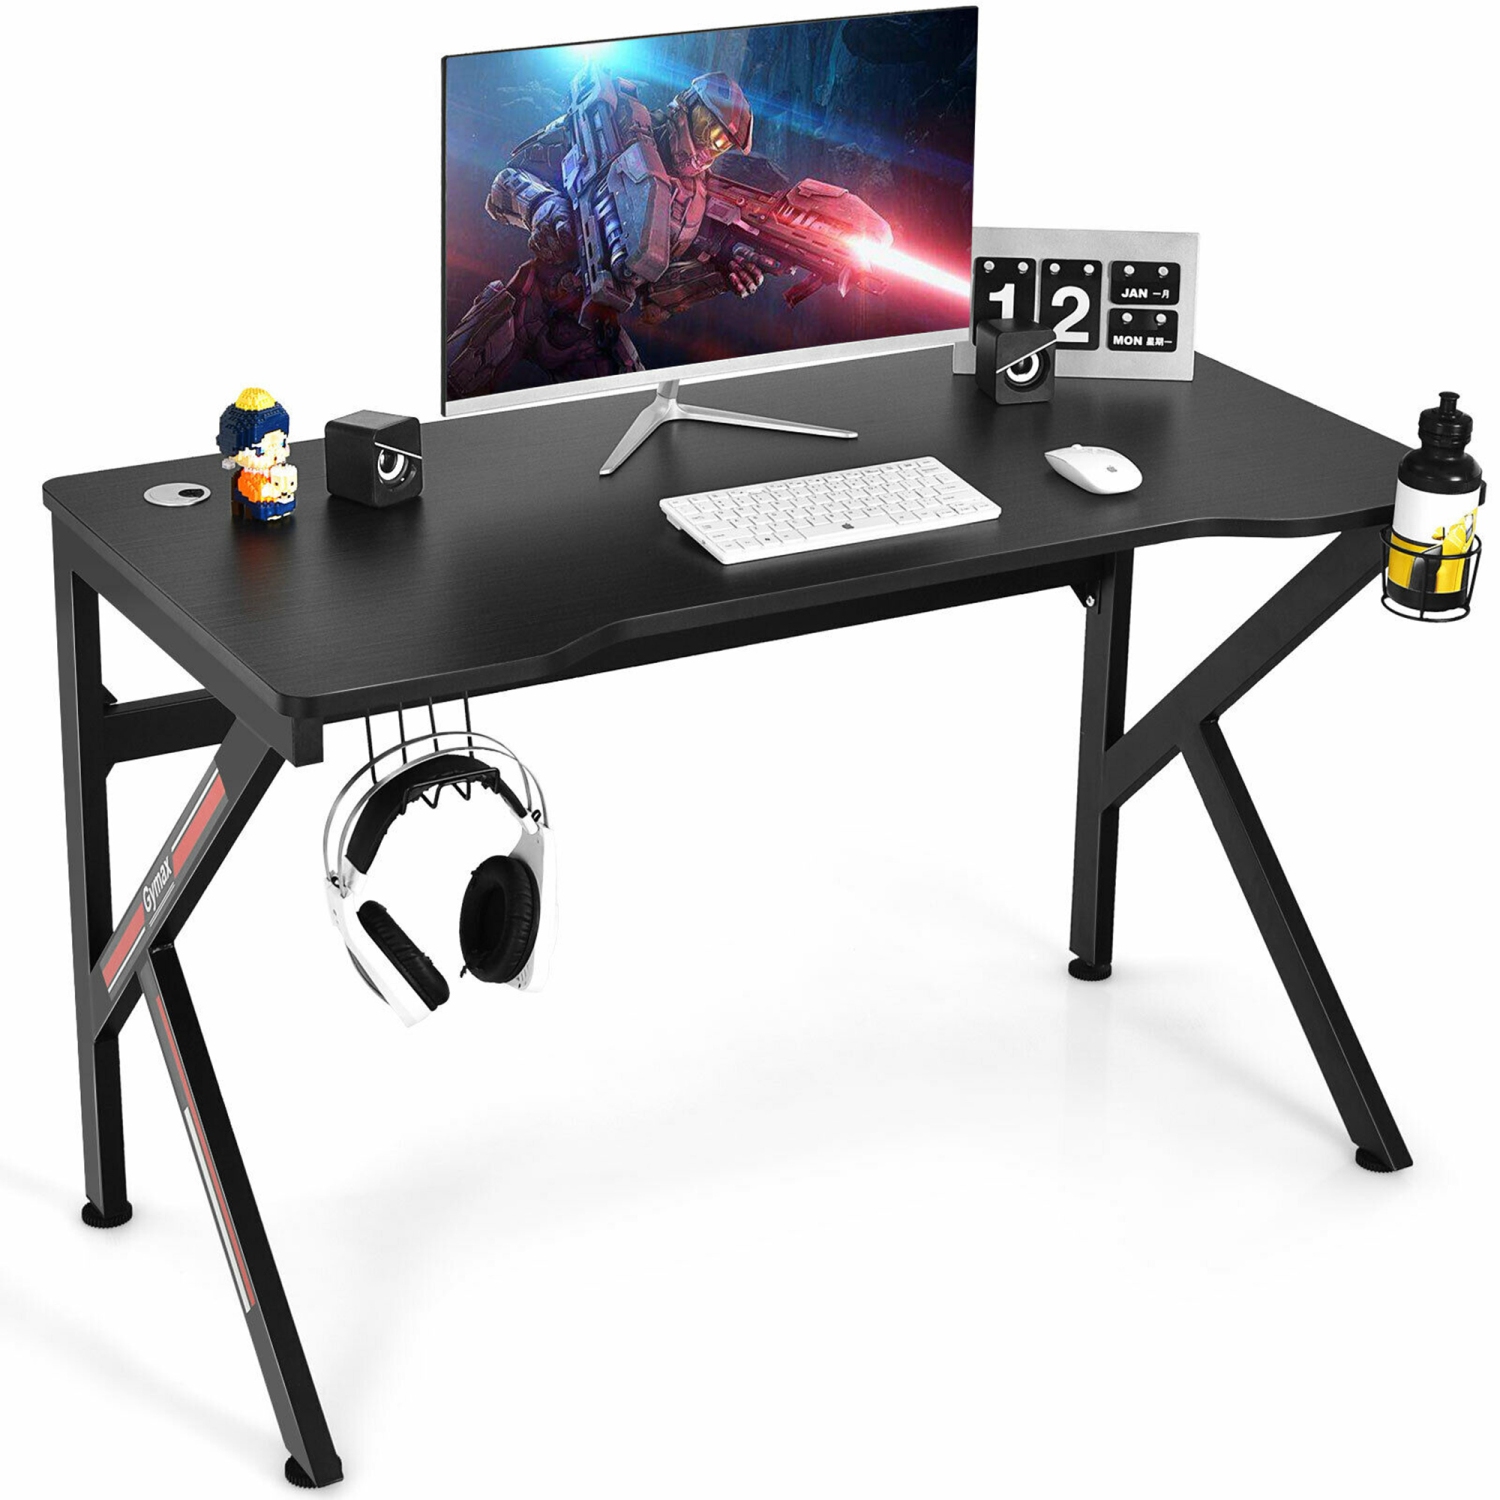 Gymax 48'' K-shaped Gaming Desk Computer Table with Cup Holder & Headphone Hook